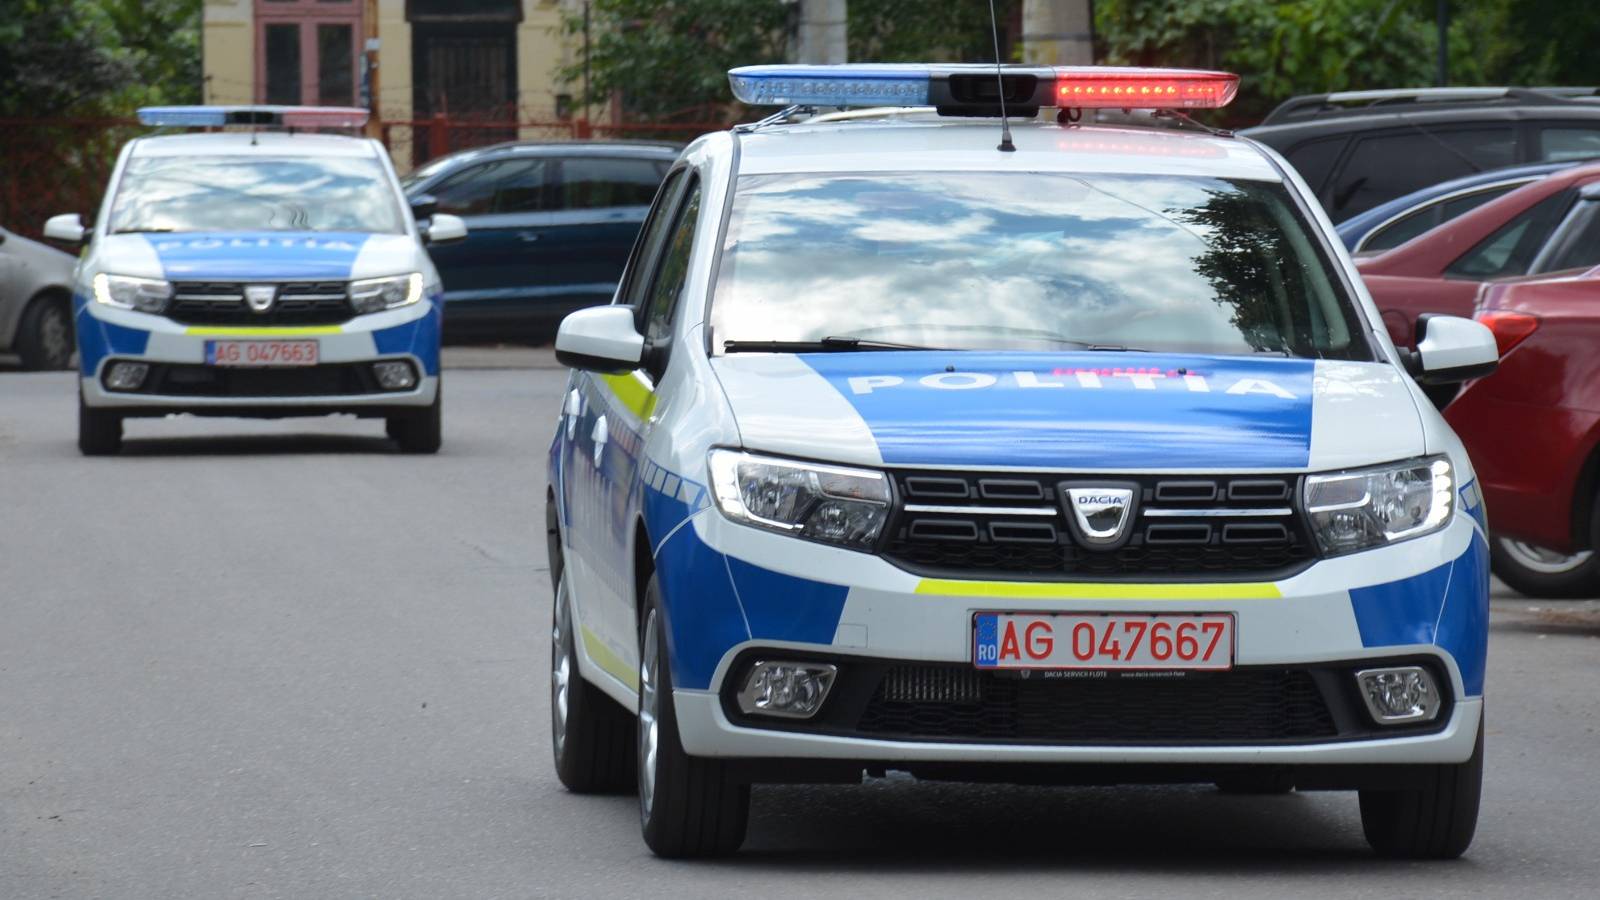 Raids of the Romanian Police made Traffic in Several Romanian Cities